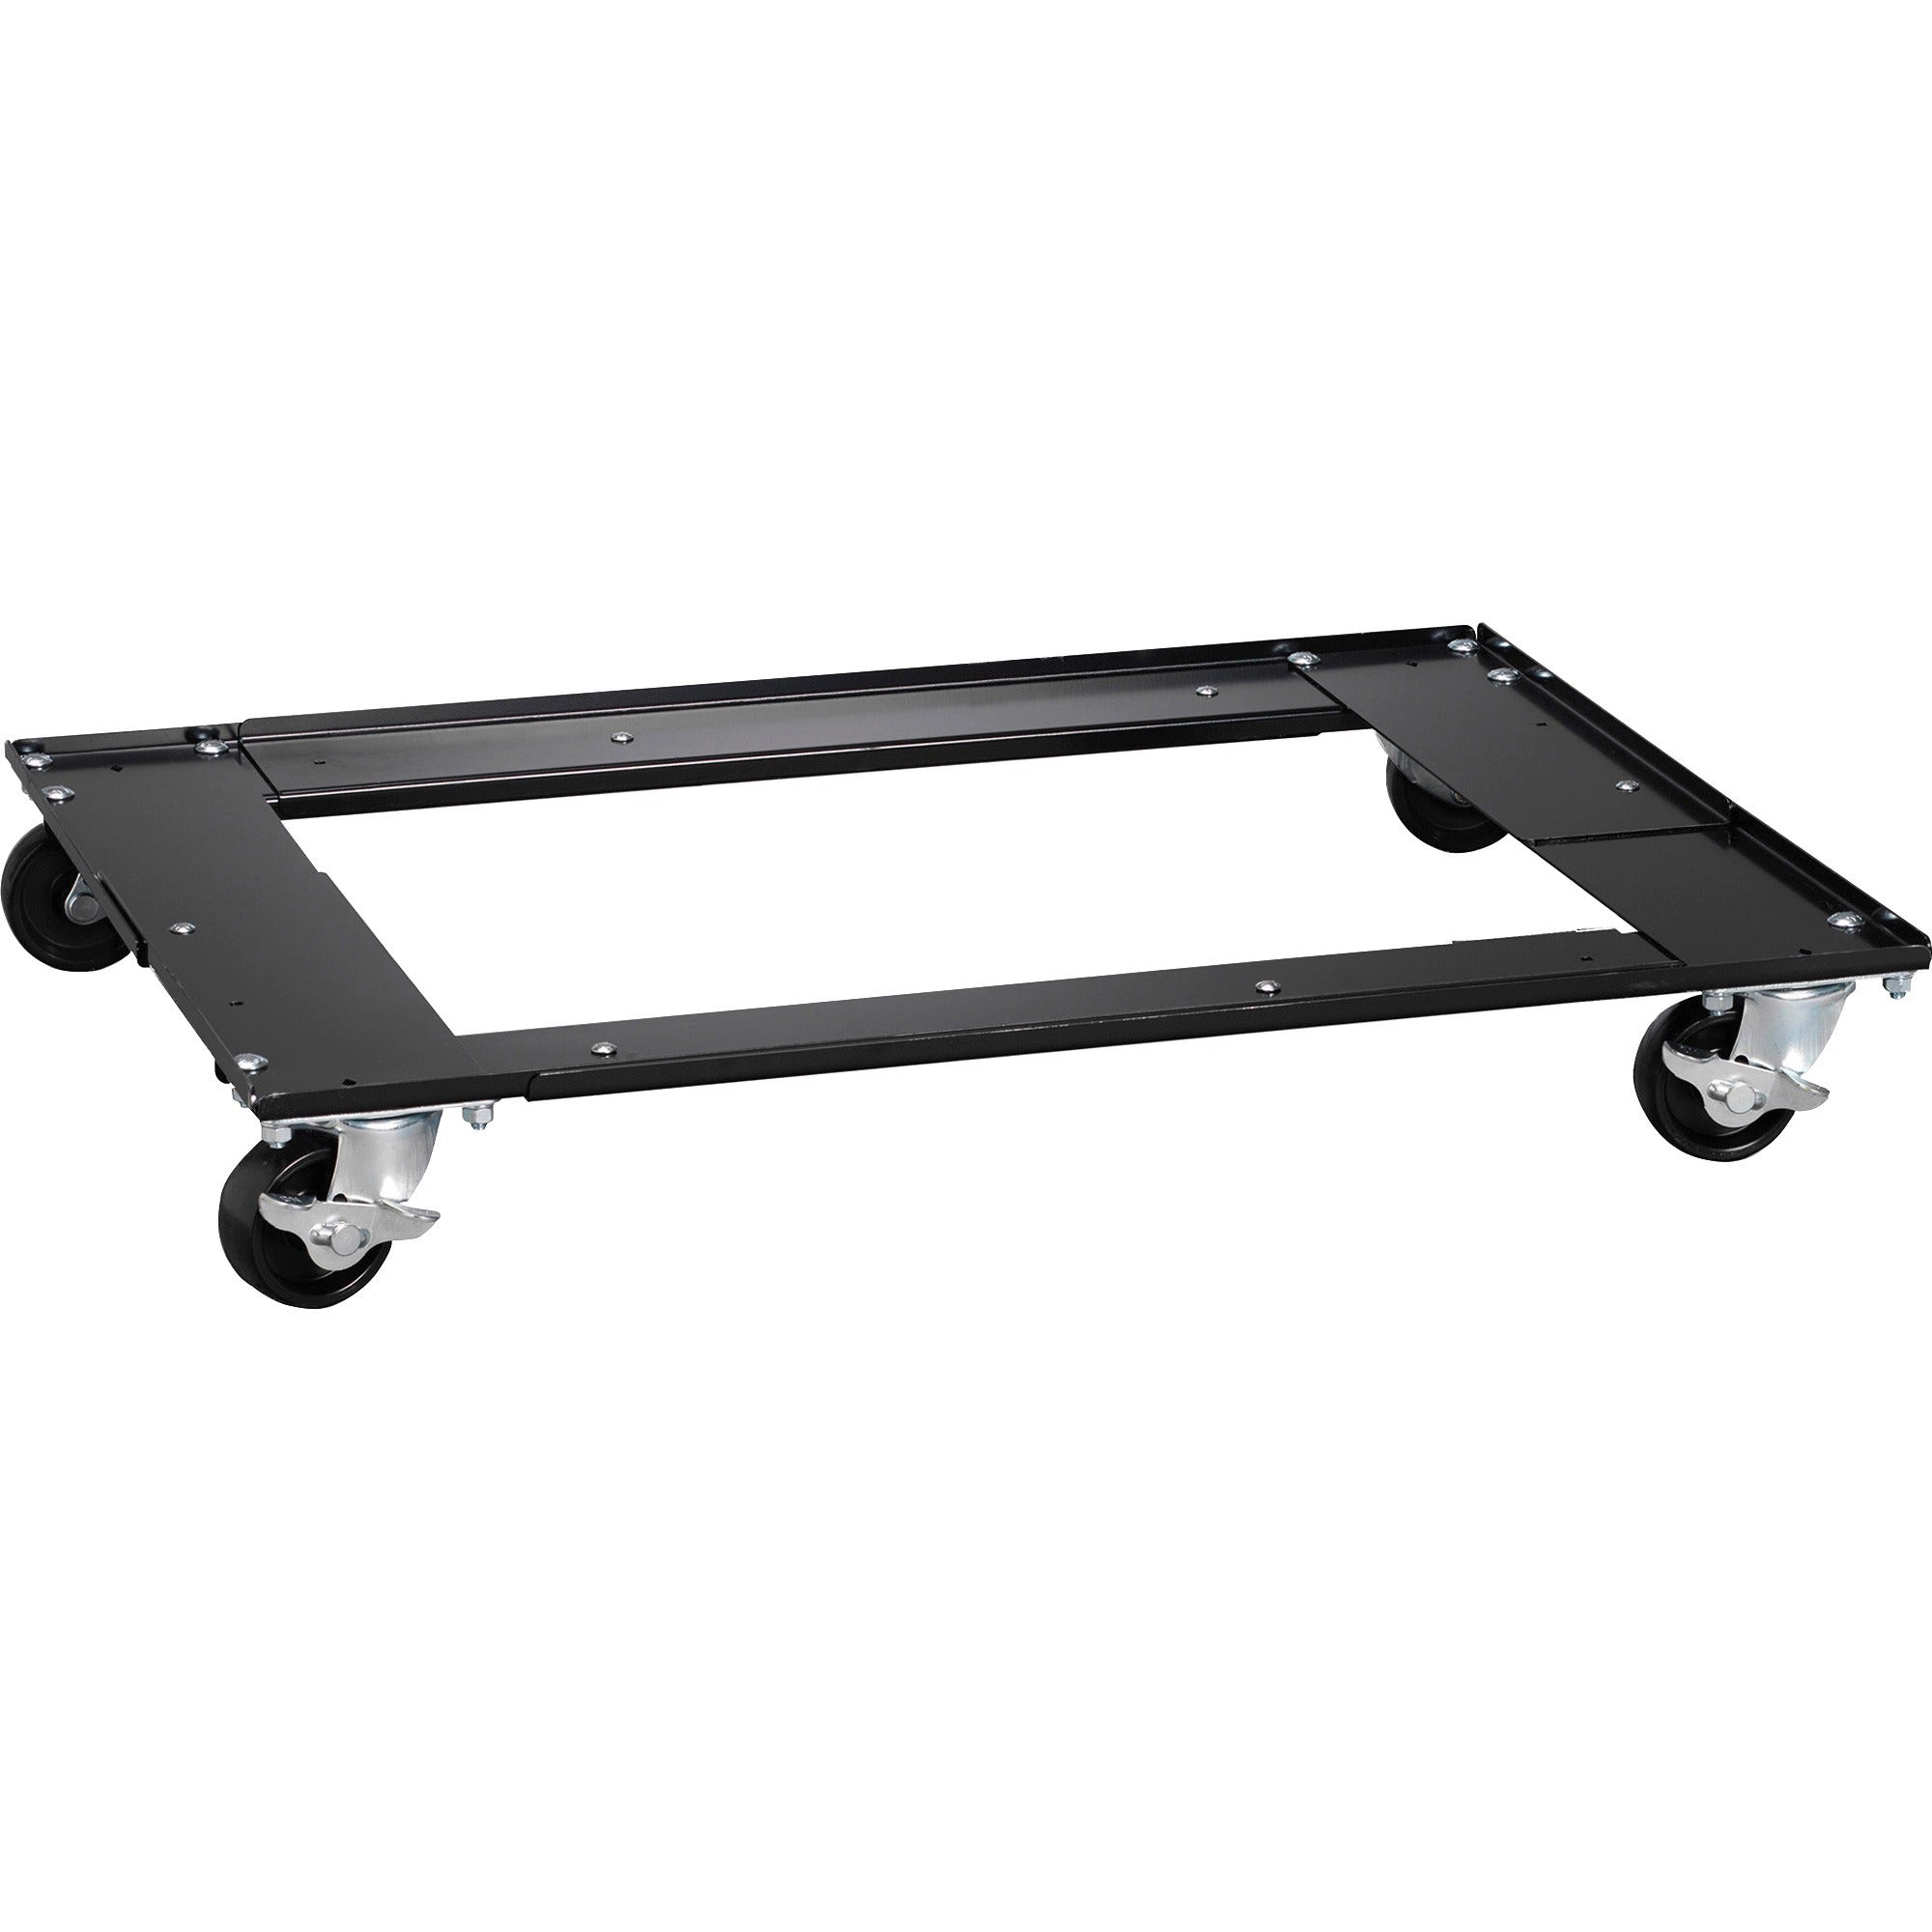 lorell-commercial-cabinet-dolly-metal-x-42-width-x-24-depth-x-4-height-black-1-each_llr59708 - 1